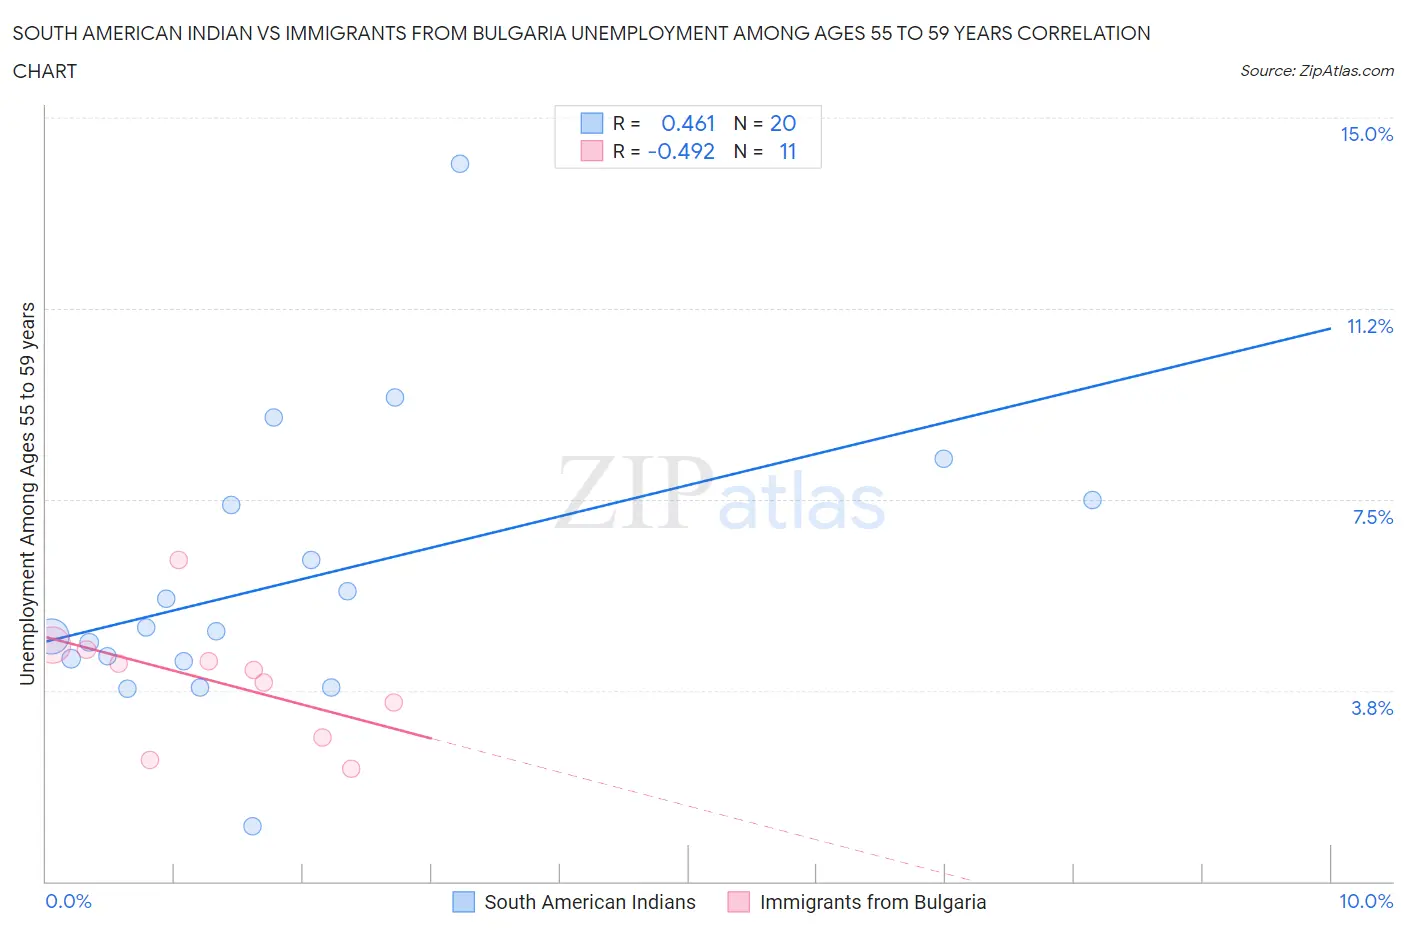 South American Indian vs Immigrants from Bulgaria Unemployment Among Ages 55 to 59 years